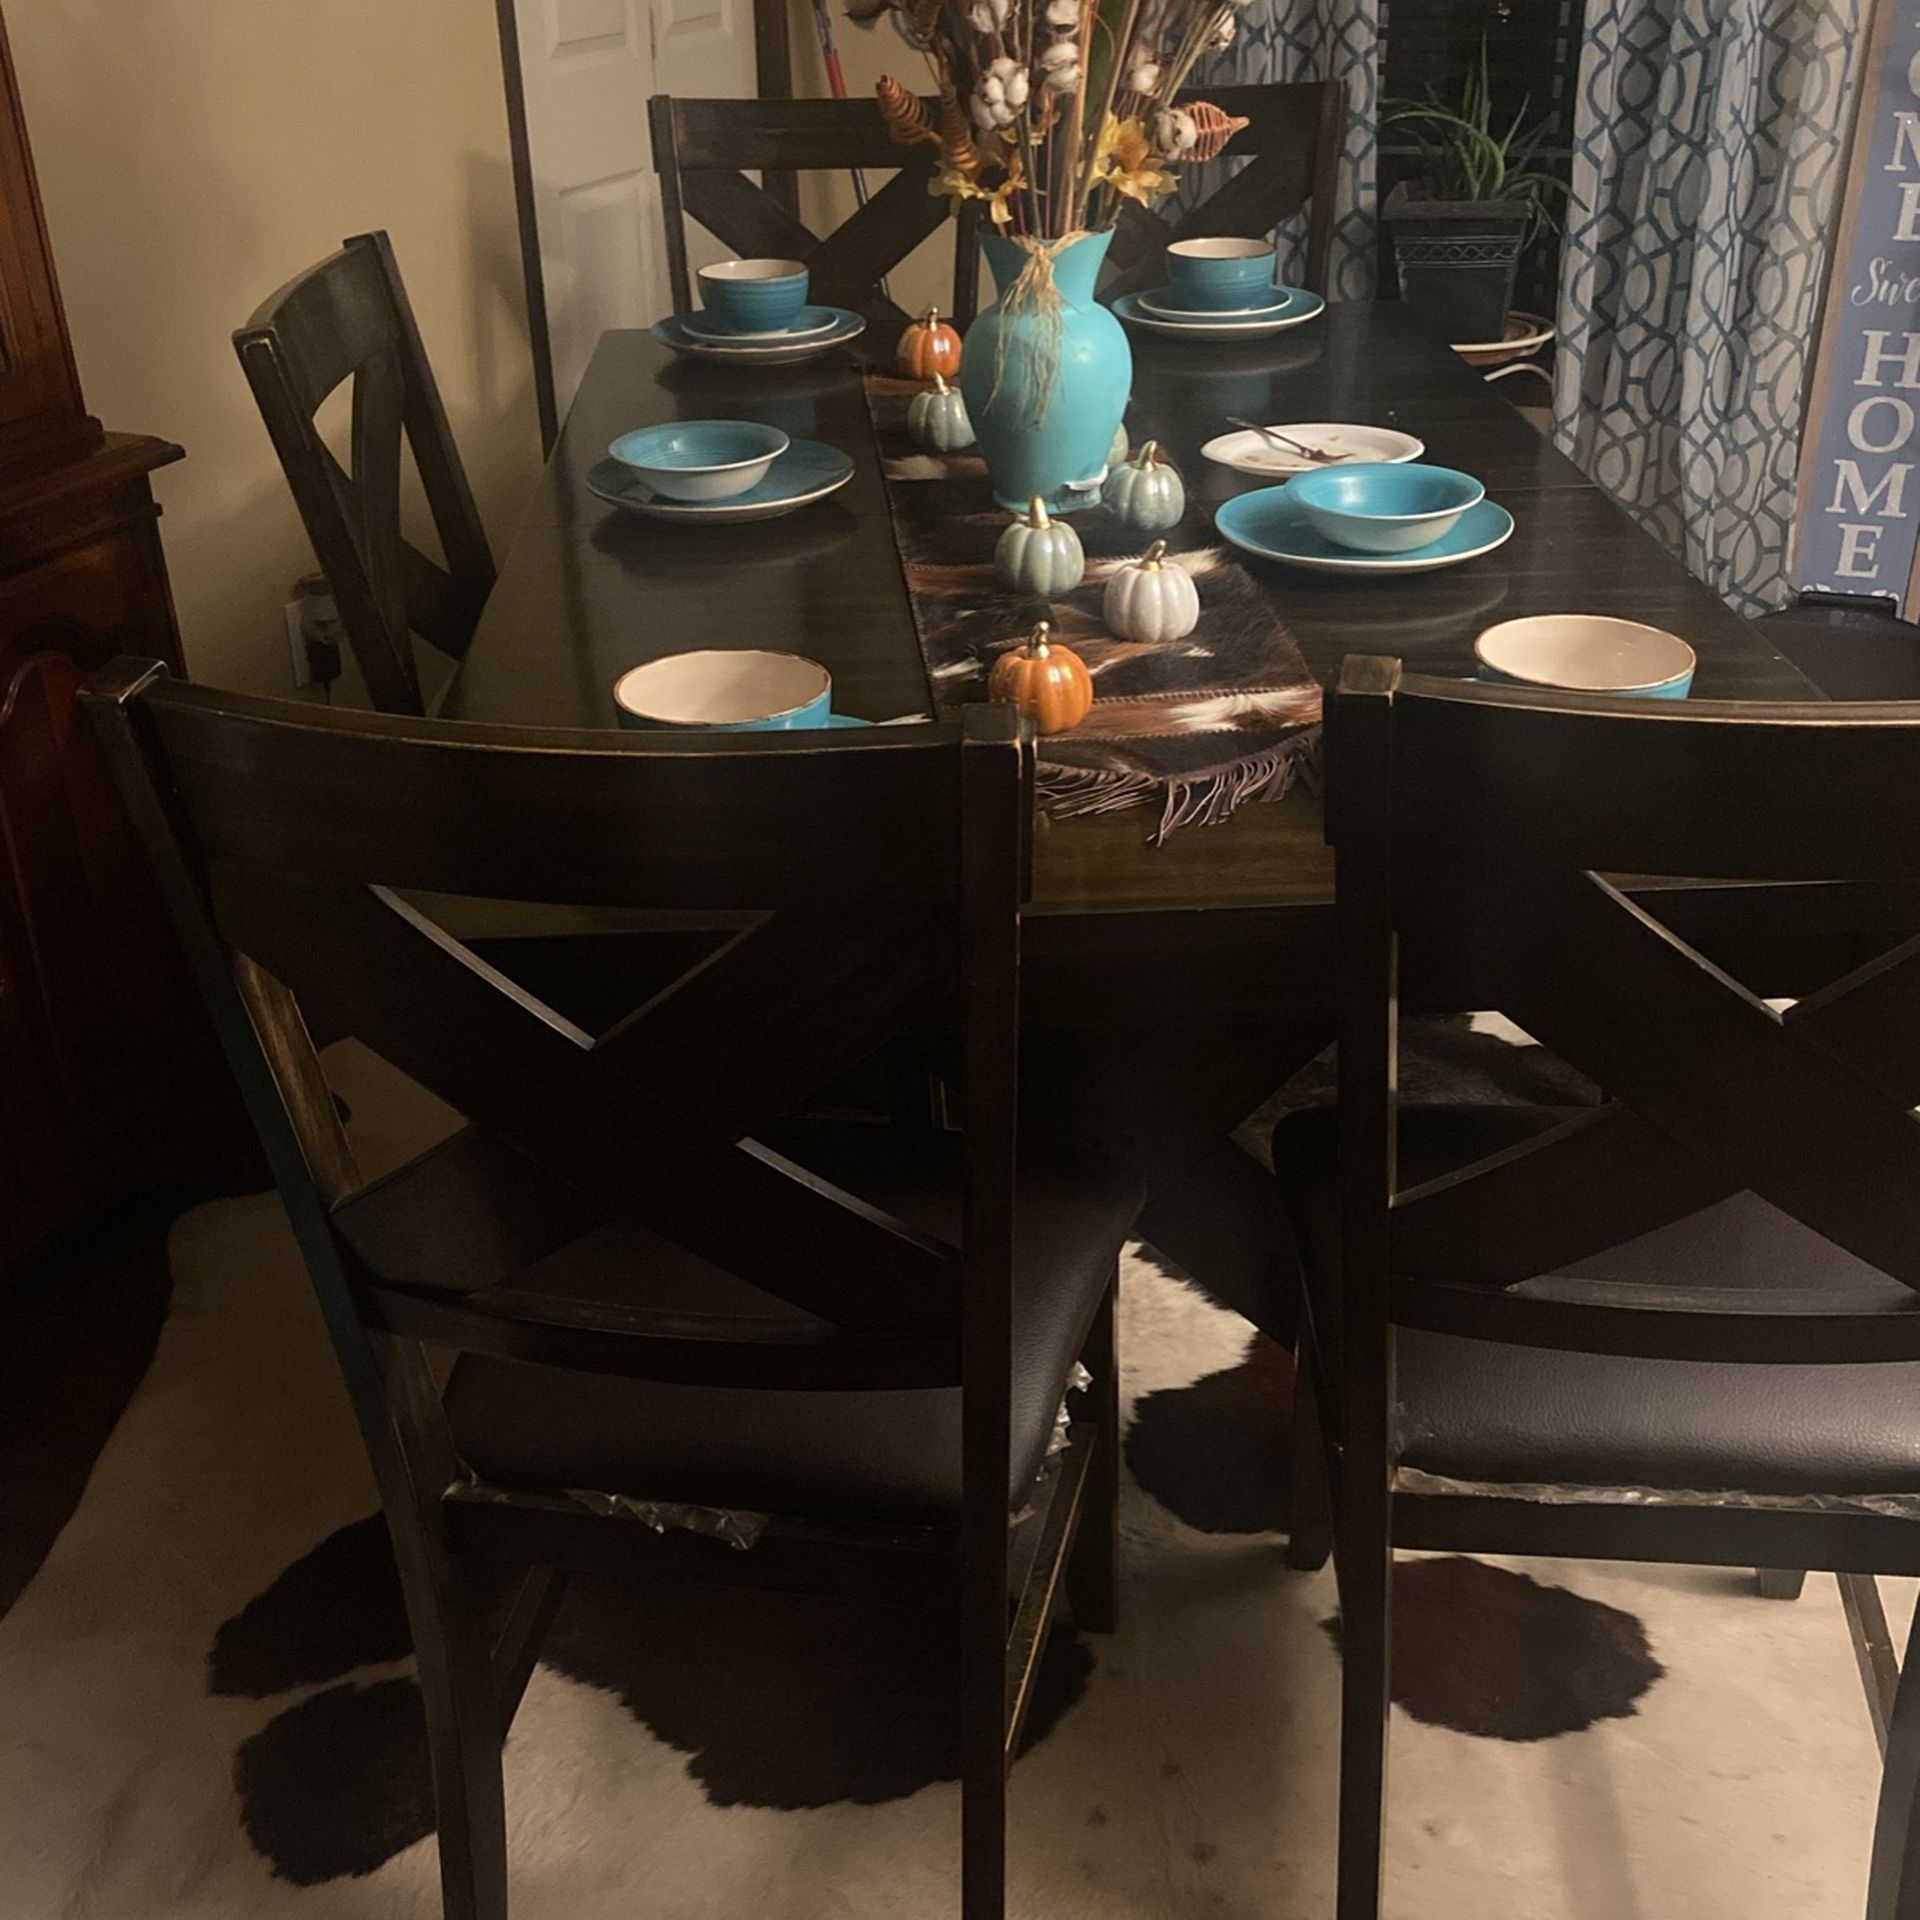 Dining Table With 6 chairs